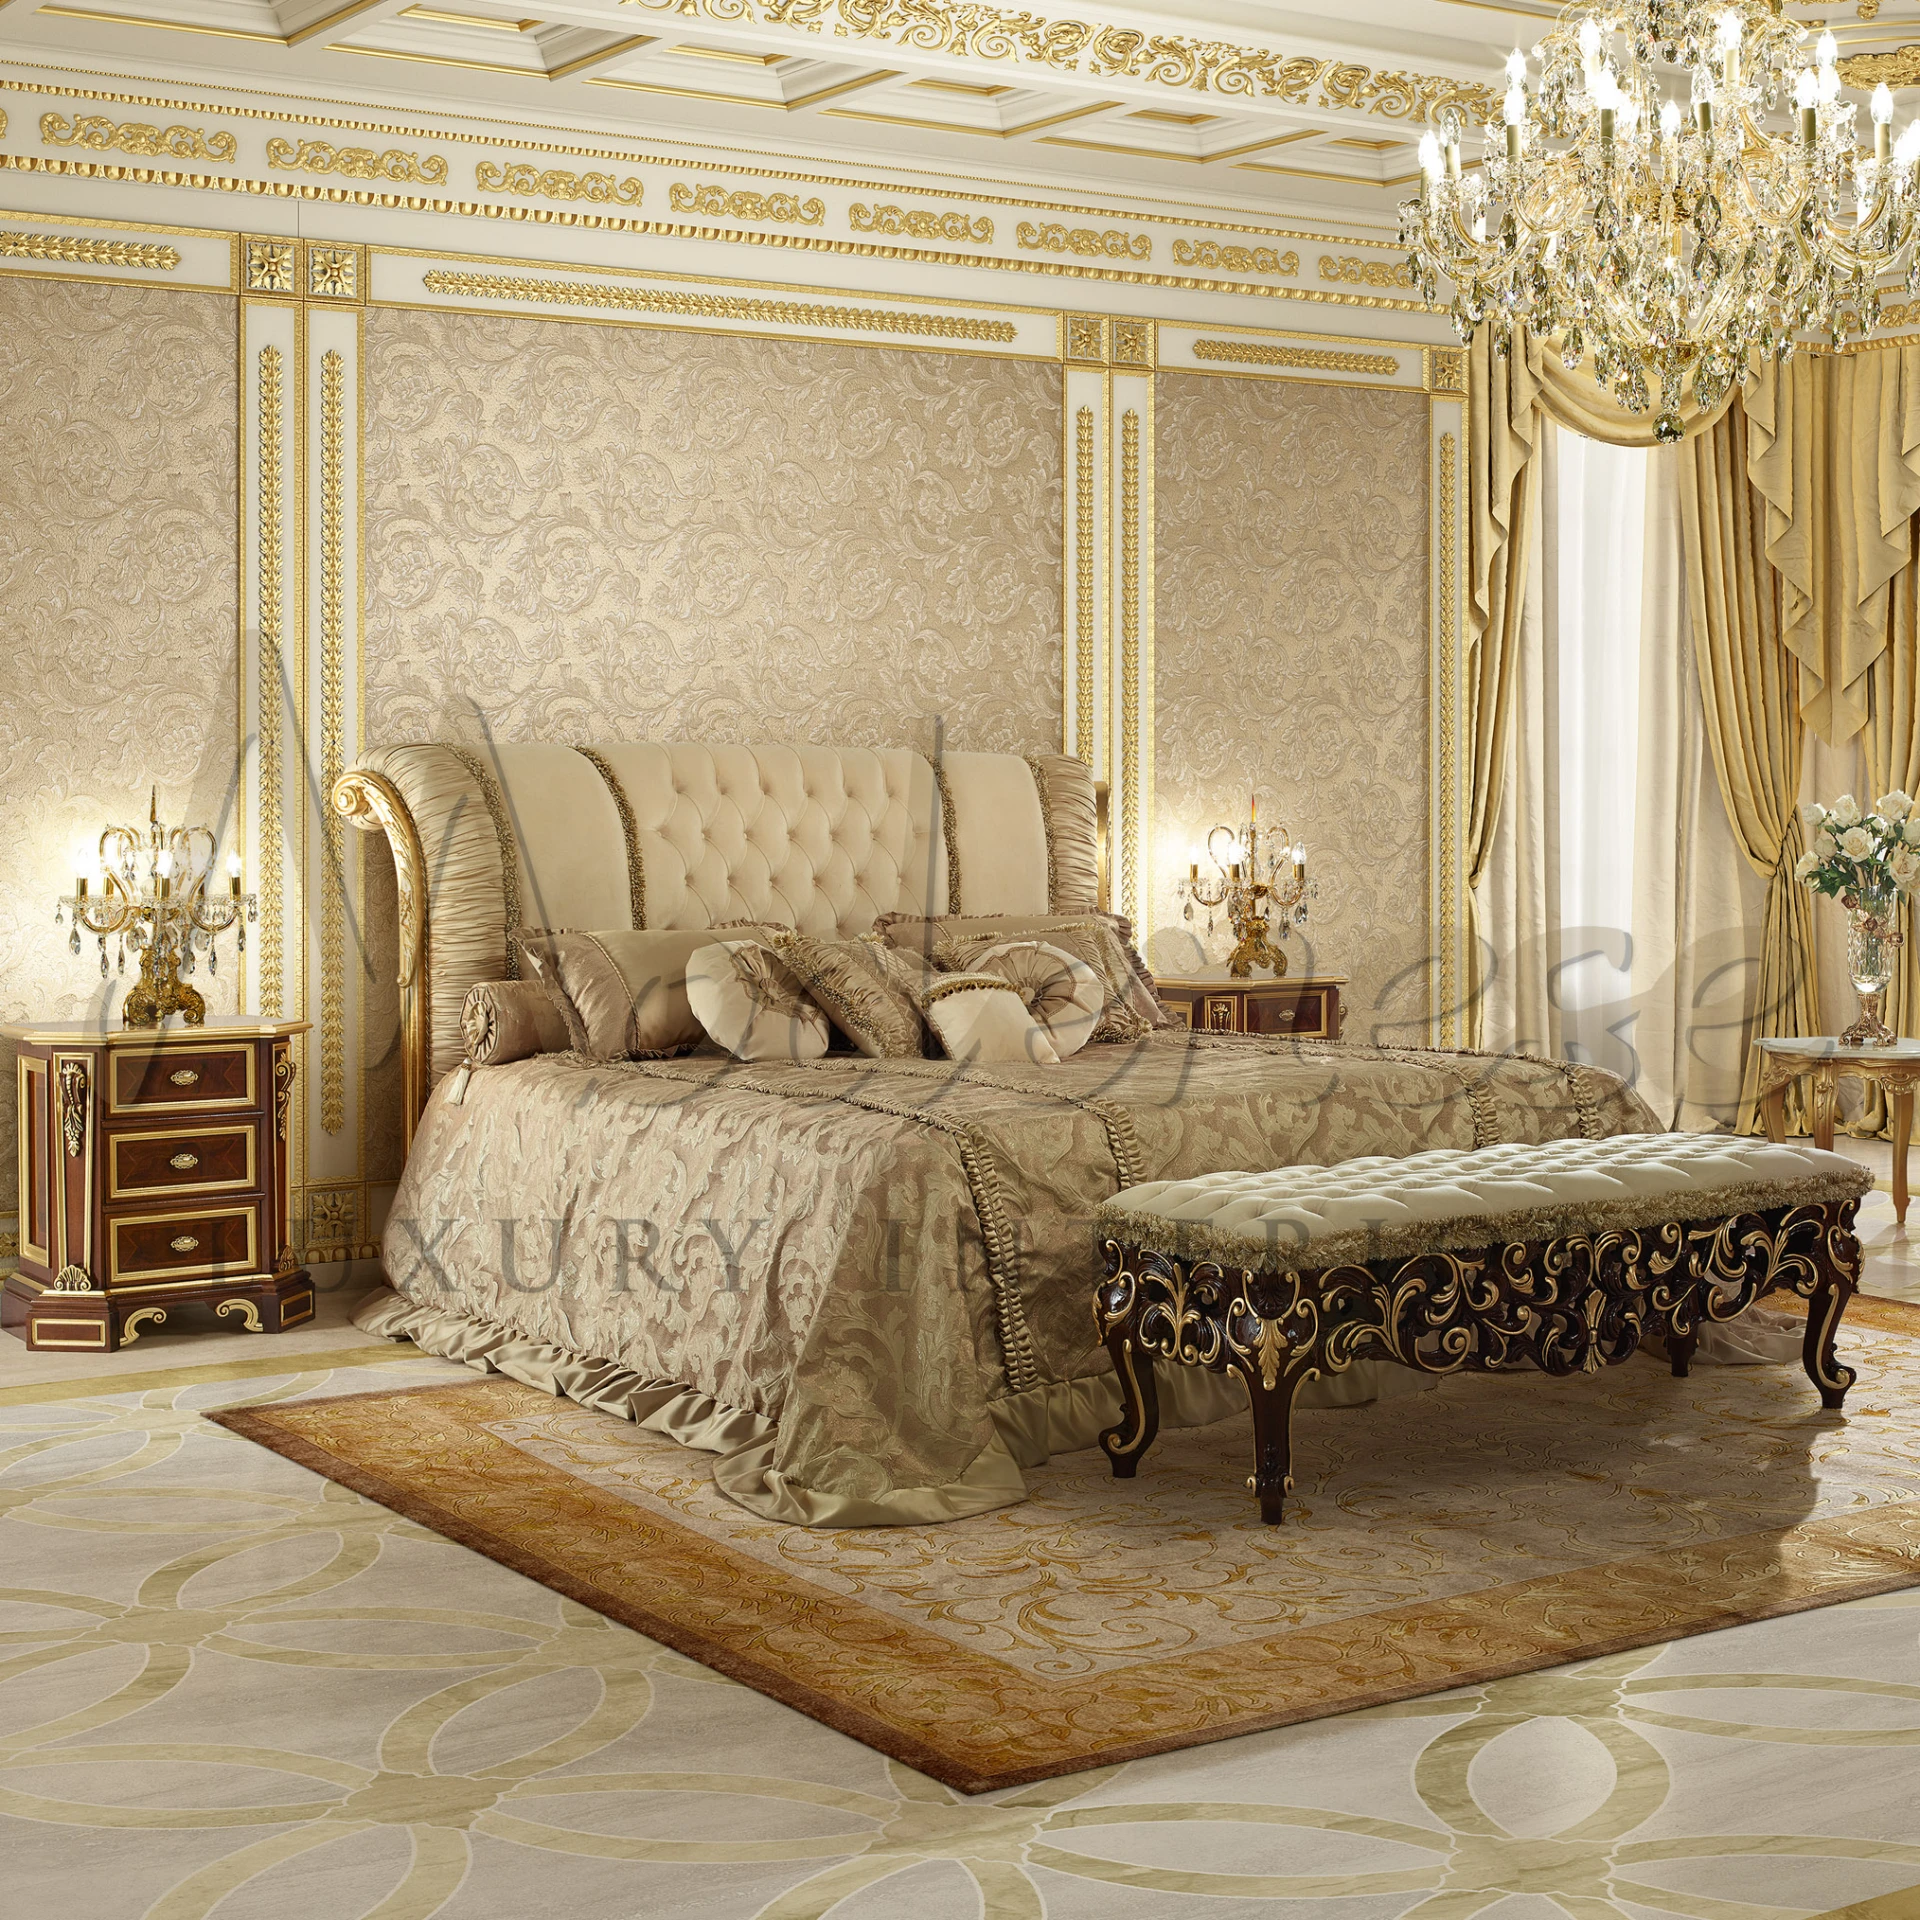  A richly decorated corner of a bedroom, imbued with the luxurious charm of the baroque period. To the left, an armchair with a golden frame and opulent dark fabric makes a bold statement.